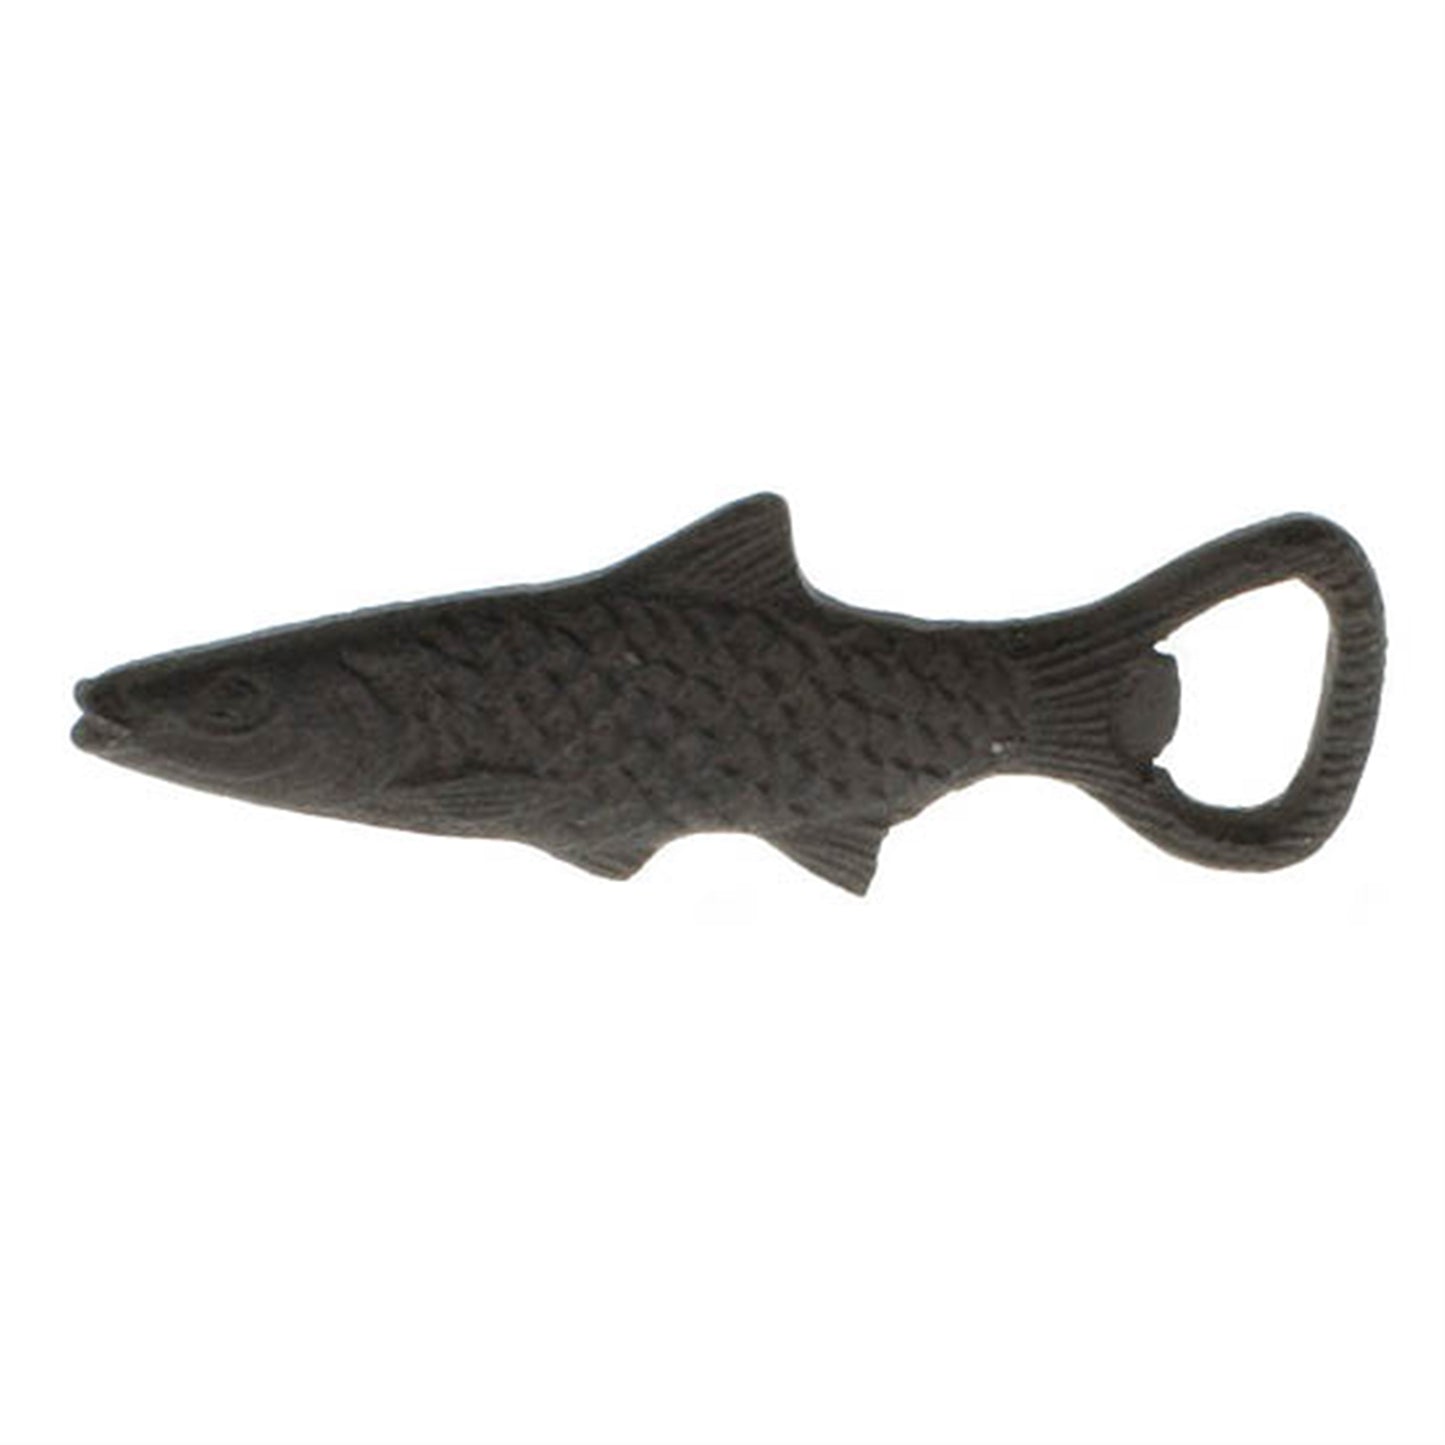 Image of a cast iron fish bottle opener.